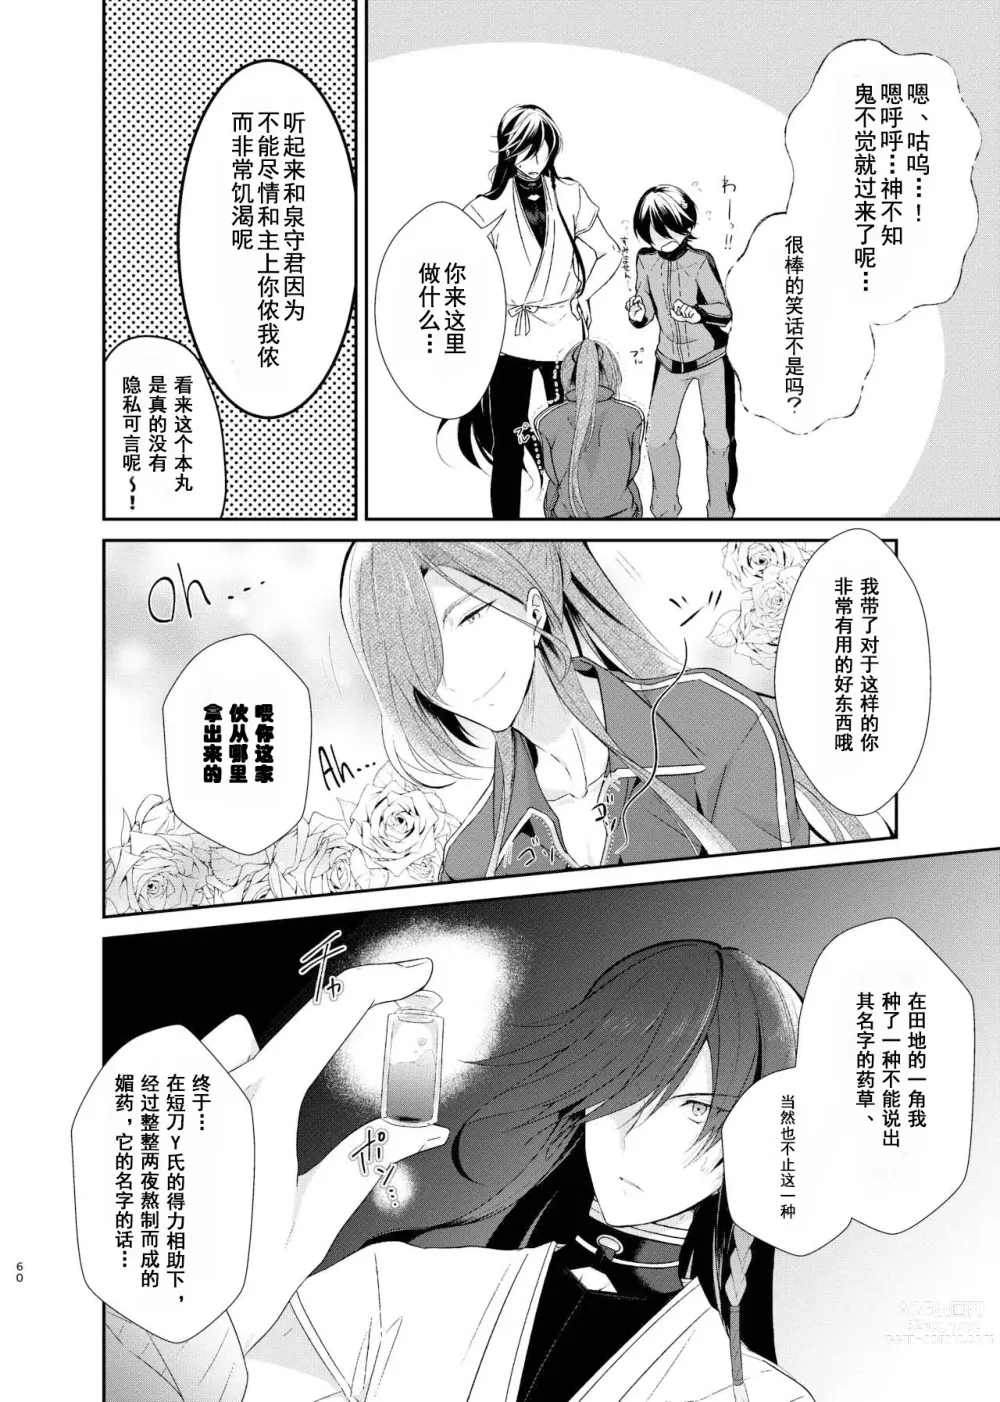 Page 5 of doujinshi 淘染的青空